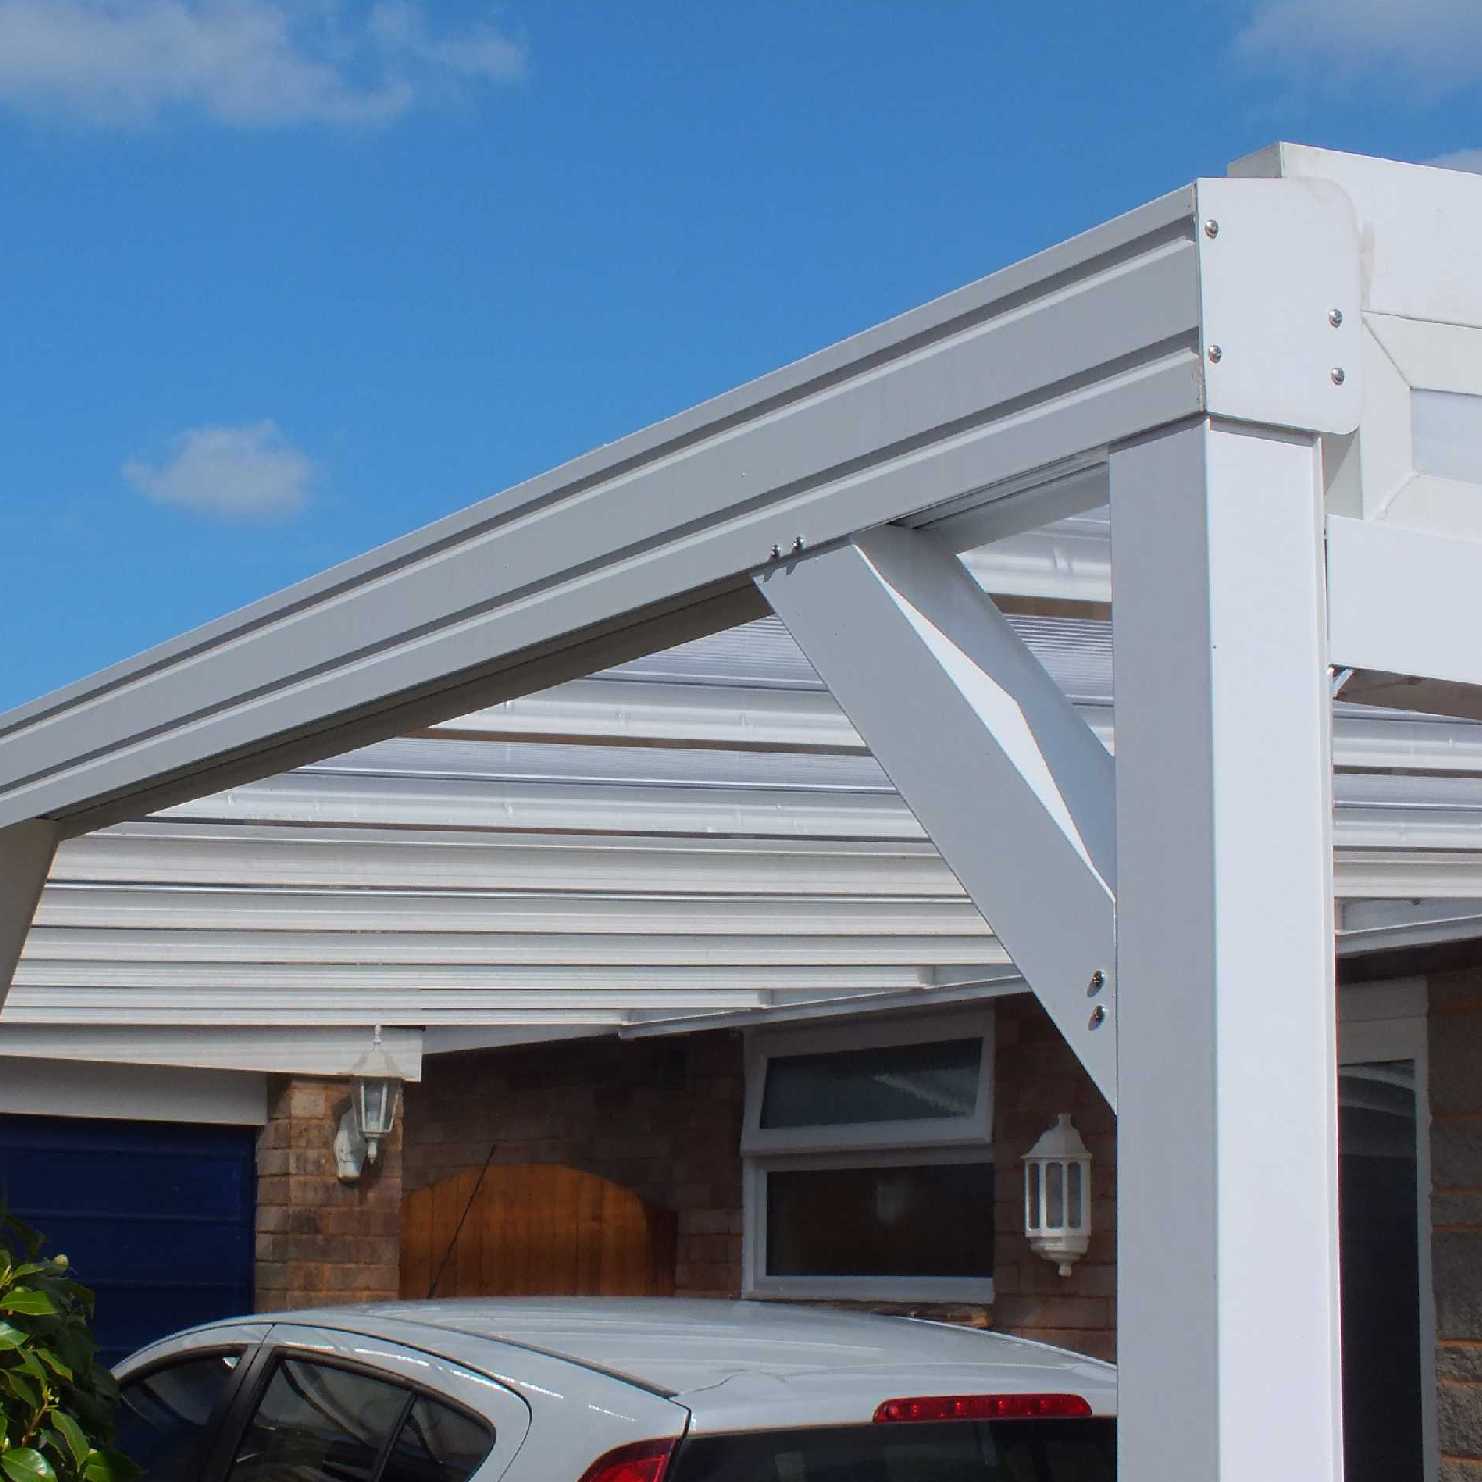 Buy Omega Smart Lean-To Canopy, White with 16mm Polycarbonate Glazing - 2.1m (W) x 1.5m (P), (2) Supporting Posts online today